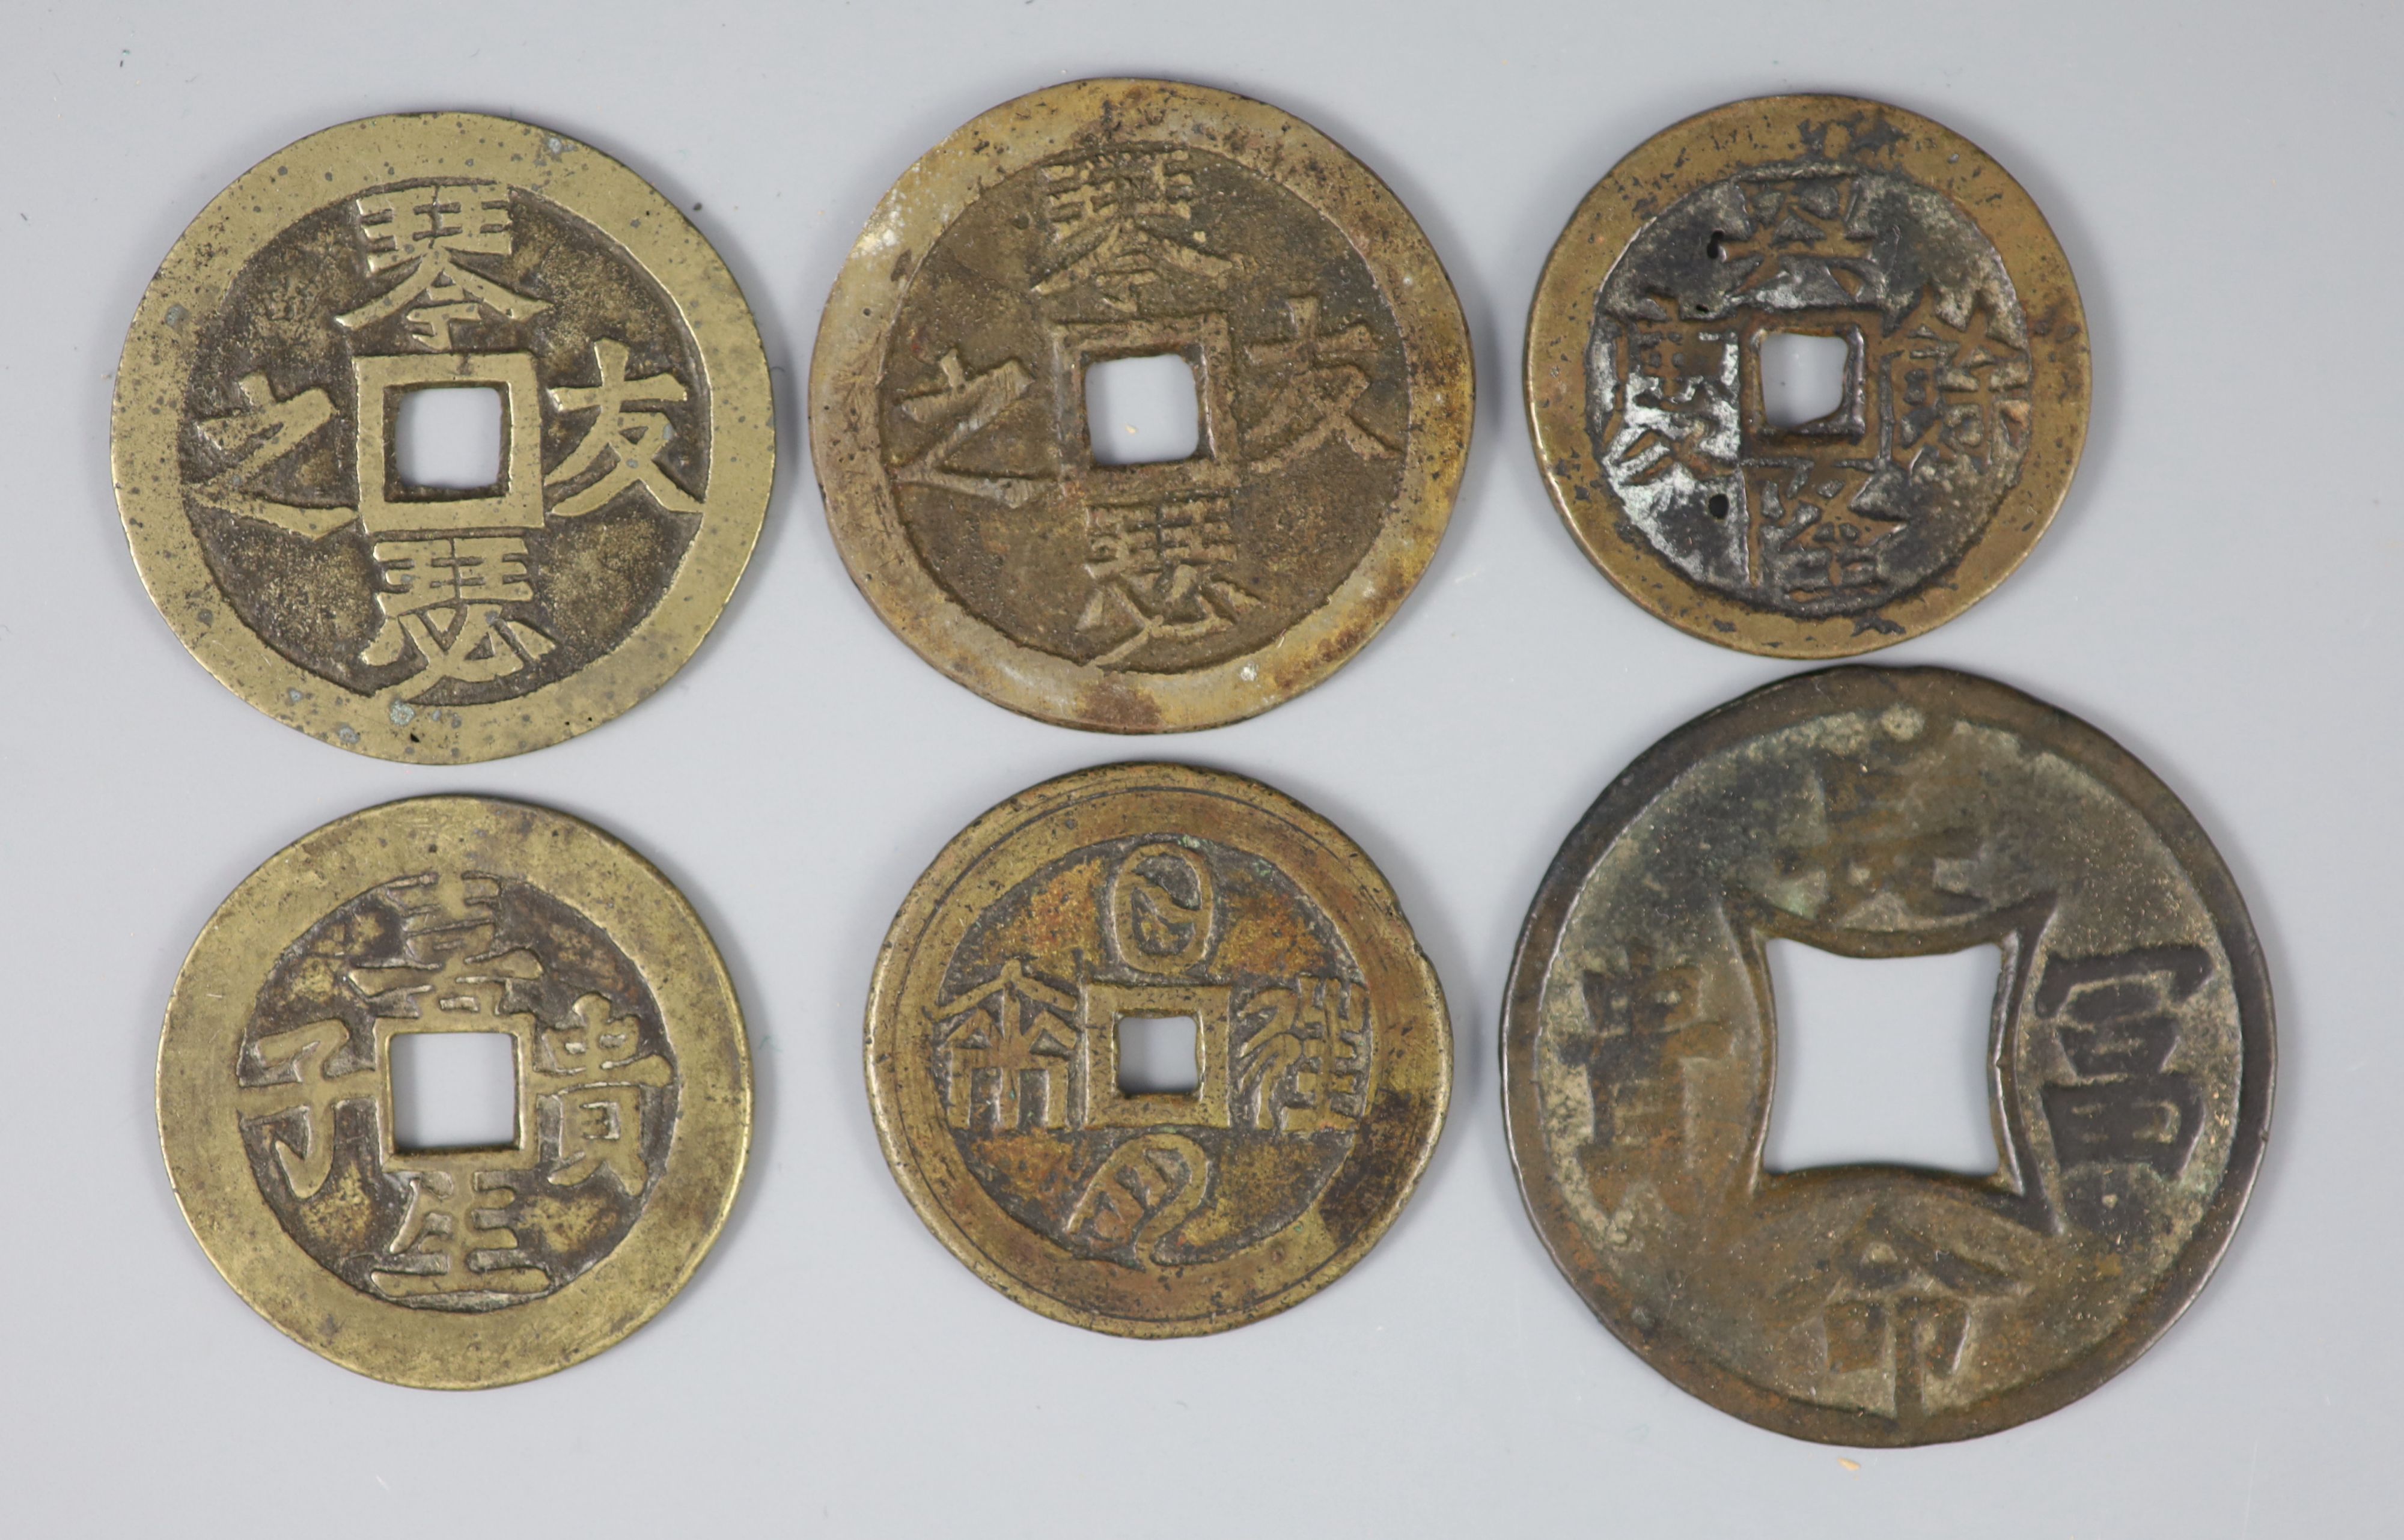 China, 6 bronze or copper charms or amulets, Qing dynasty,